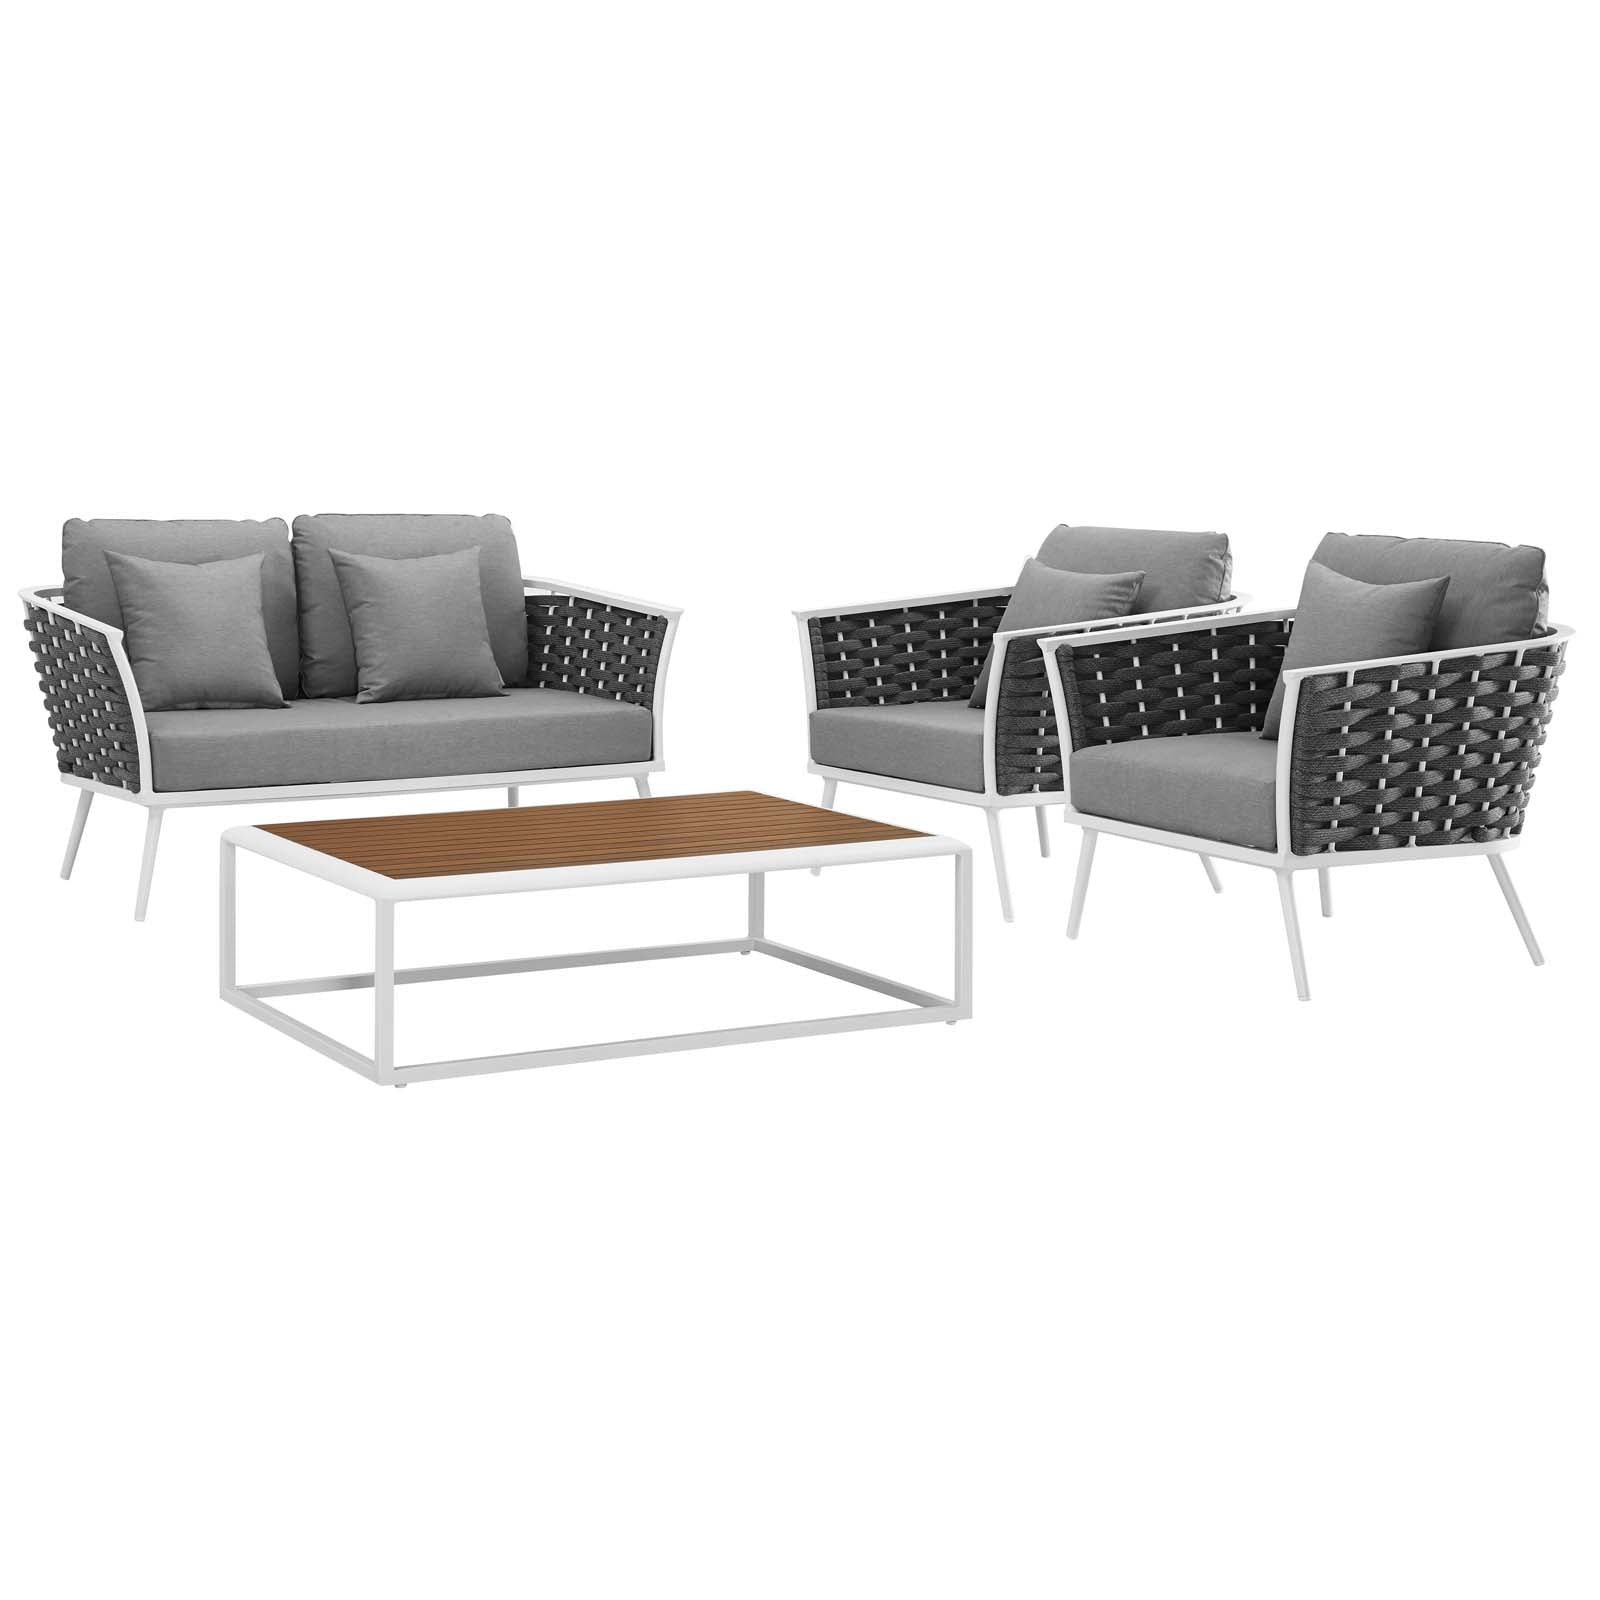 Stance 4 Piece Outdoor Patio Aluminum Sectional Sofa Set With Stance Loveseat